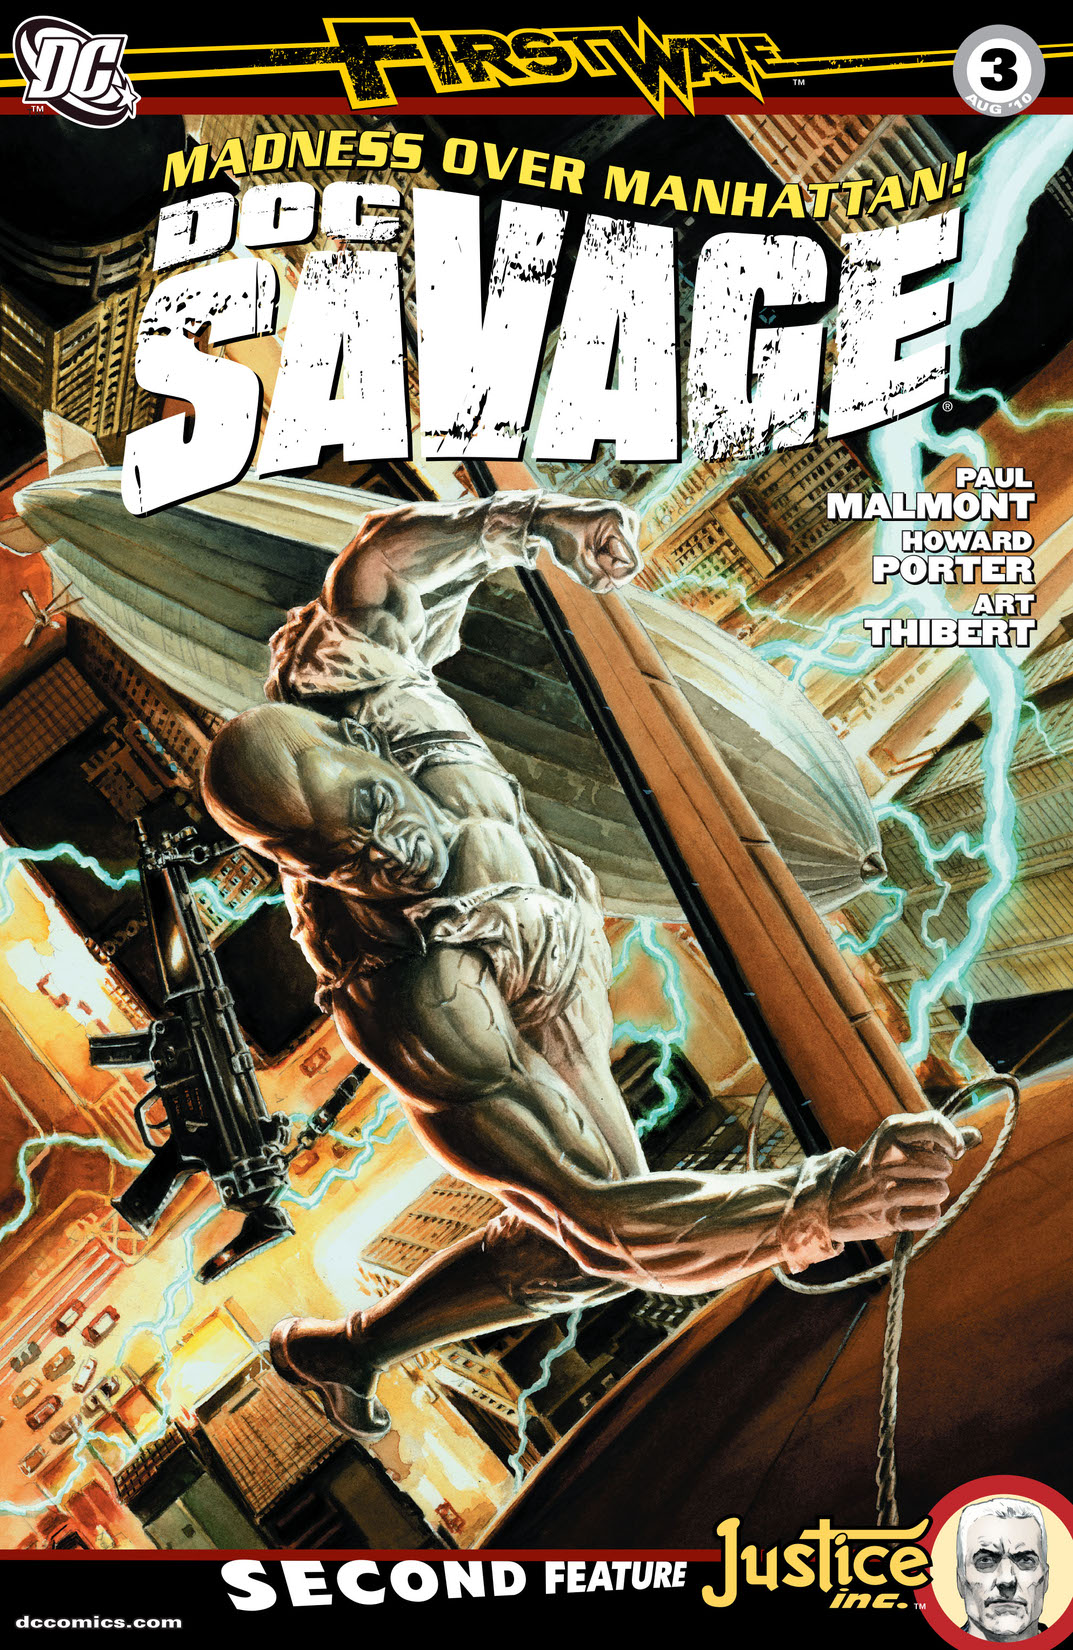 Doc Savage #3 preview images